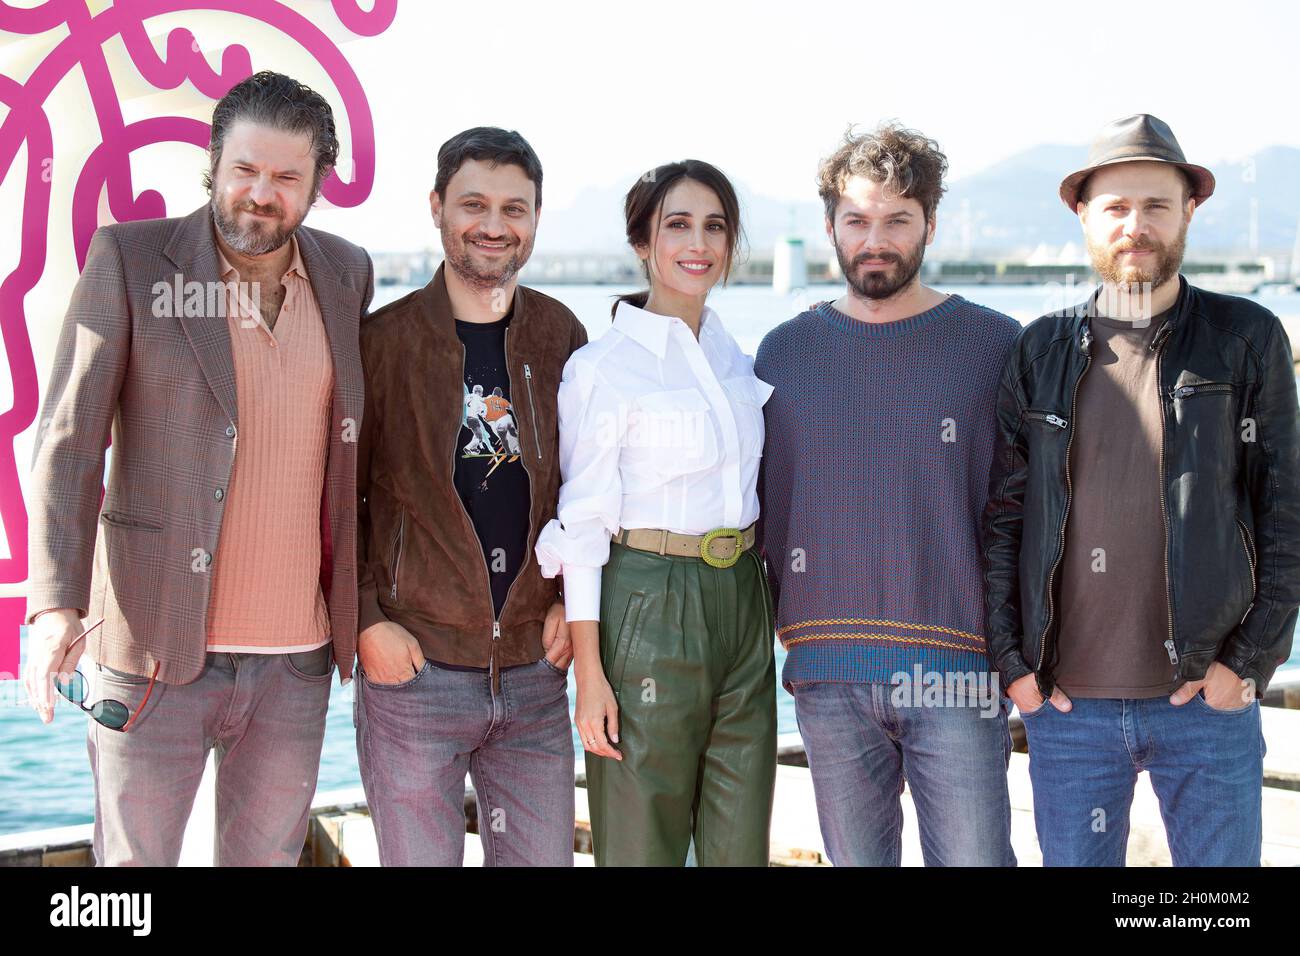 Edoardo Pesce, scenarist Valerio Cilio, actress Silvia D amico, creator Stefano Lodovichi and film music composer Giorgio Giampa attend the Christian photocall during the 4th edition of the Cannes International Series Festival (Canneseries) in Cannes, on October 13, 2021, France. Photo by David Niviere/ABACAPRESS.COM Stock Photo